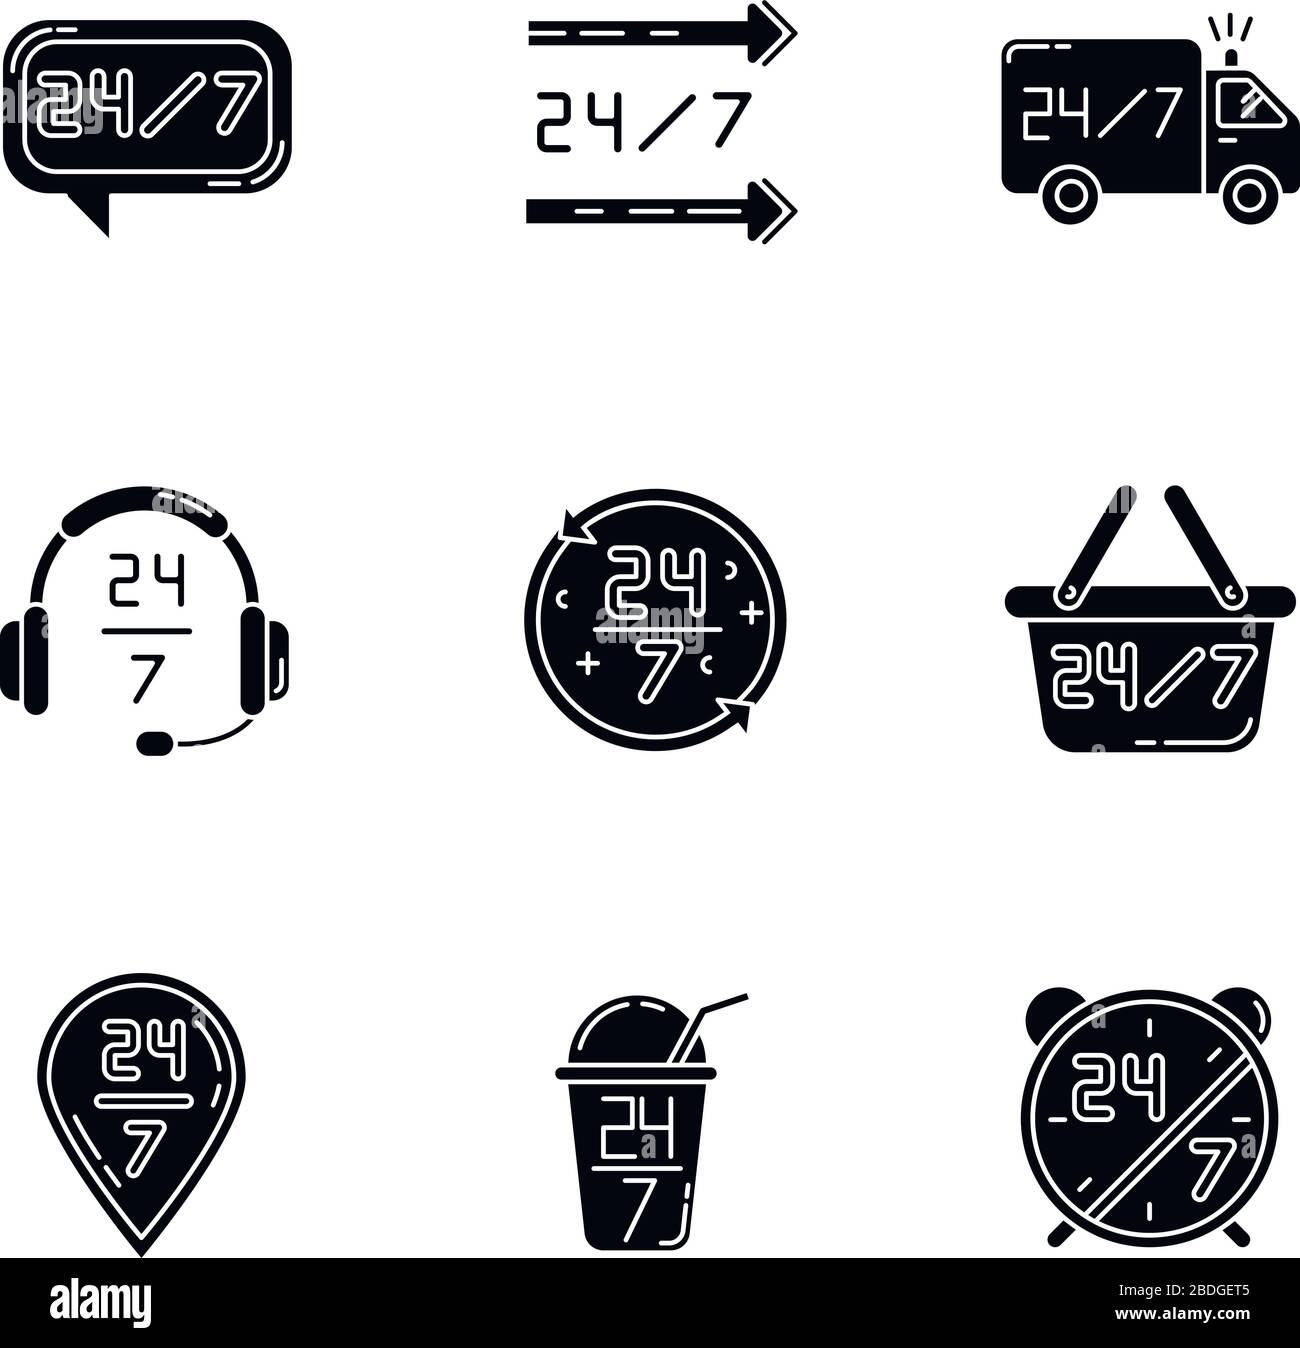 24 7 Hour Service Black Glyph Icons Set On White Space Always